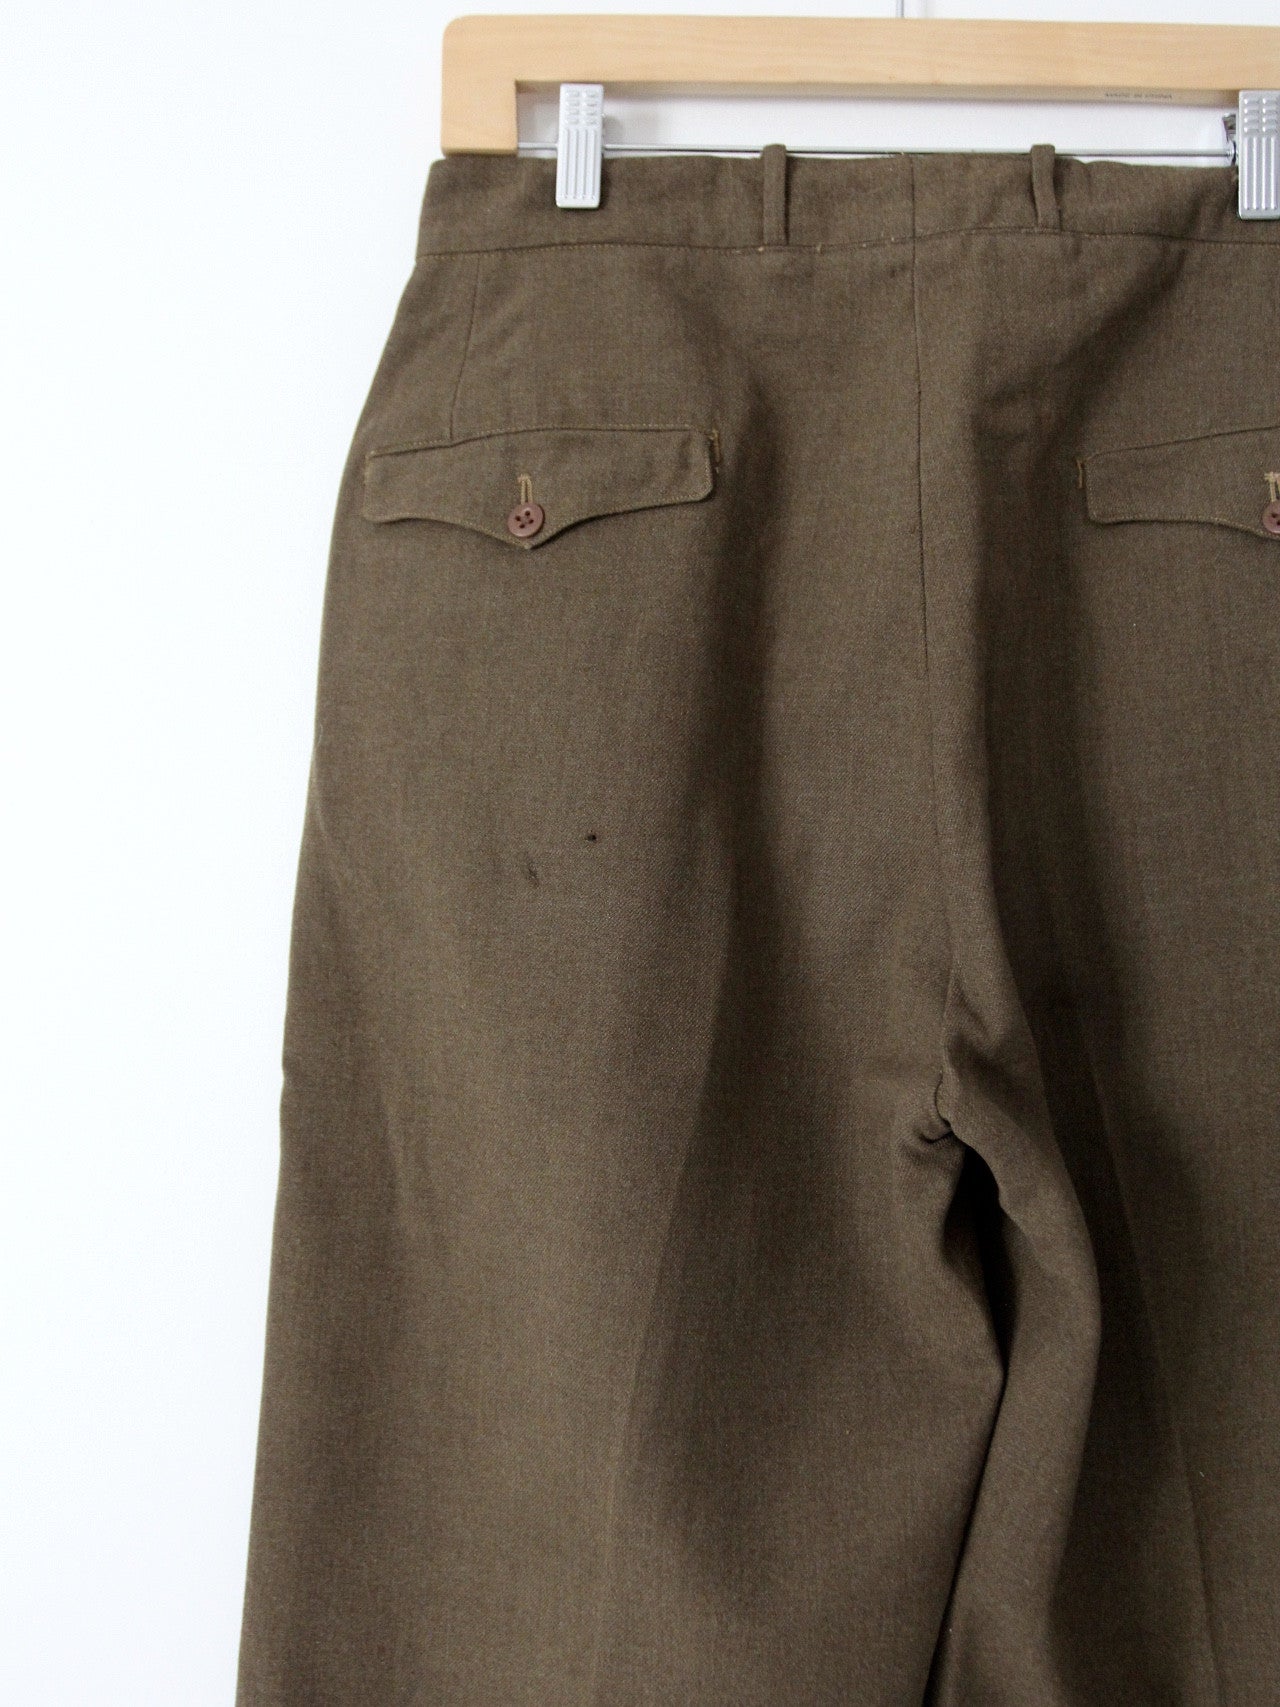 Trousers, Enlisted Men's, Service, Olive Drab (Specification QMC 8-83 Dated  7 April 1930). Trousers, Wool, Serge, Olive-Drab Light Shade; Trousers, Wool,  Serge, Special, Olive-Drab Light Shade; Trousers, Wool, Elastique,  Olive-Drab, 18-ounce; Trousers,